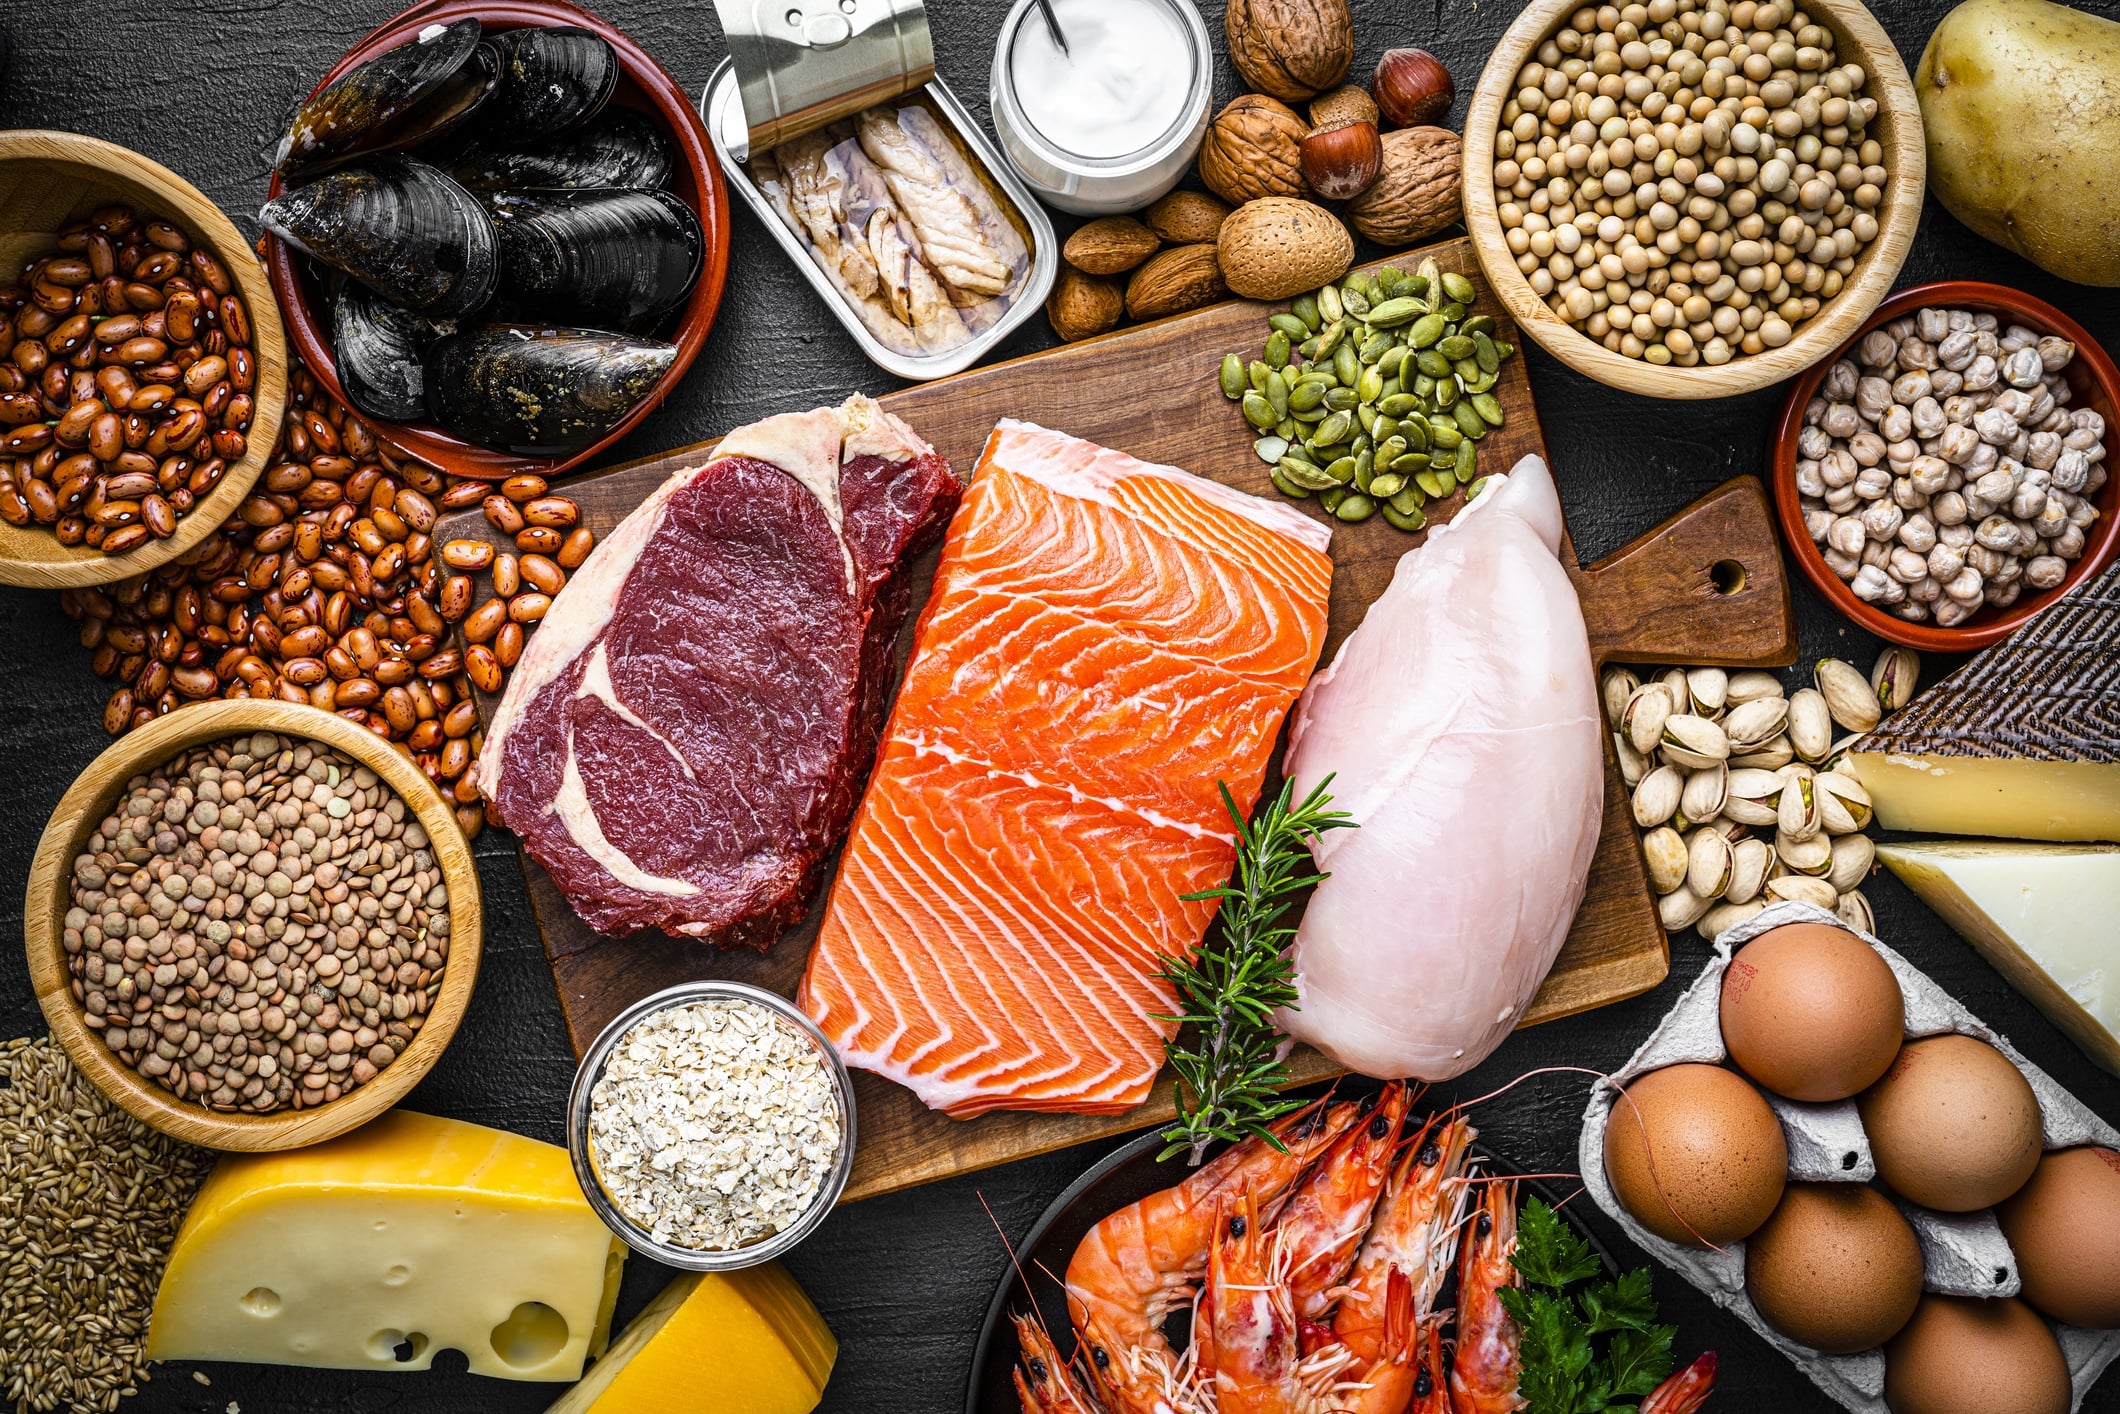 Variety of high-protein foods including raw beef, salmon, chicken breast, shrimp, mussels, cheese, eggs, nuts, seeds, beans, lentils, and grains, arranged on a dark surface.